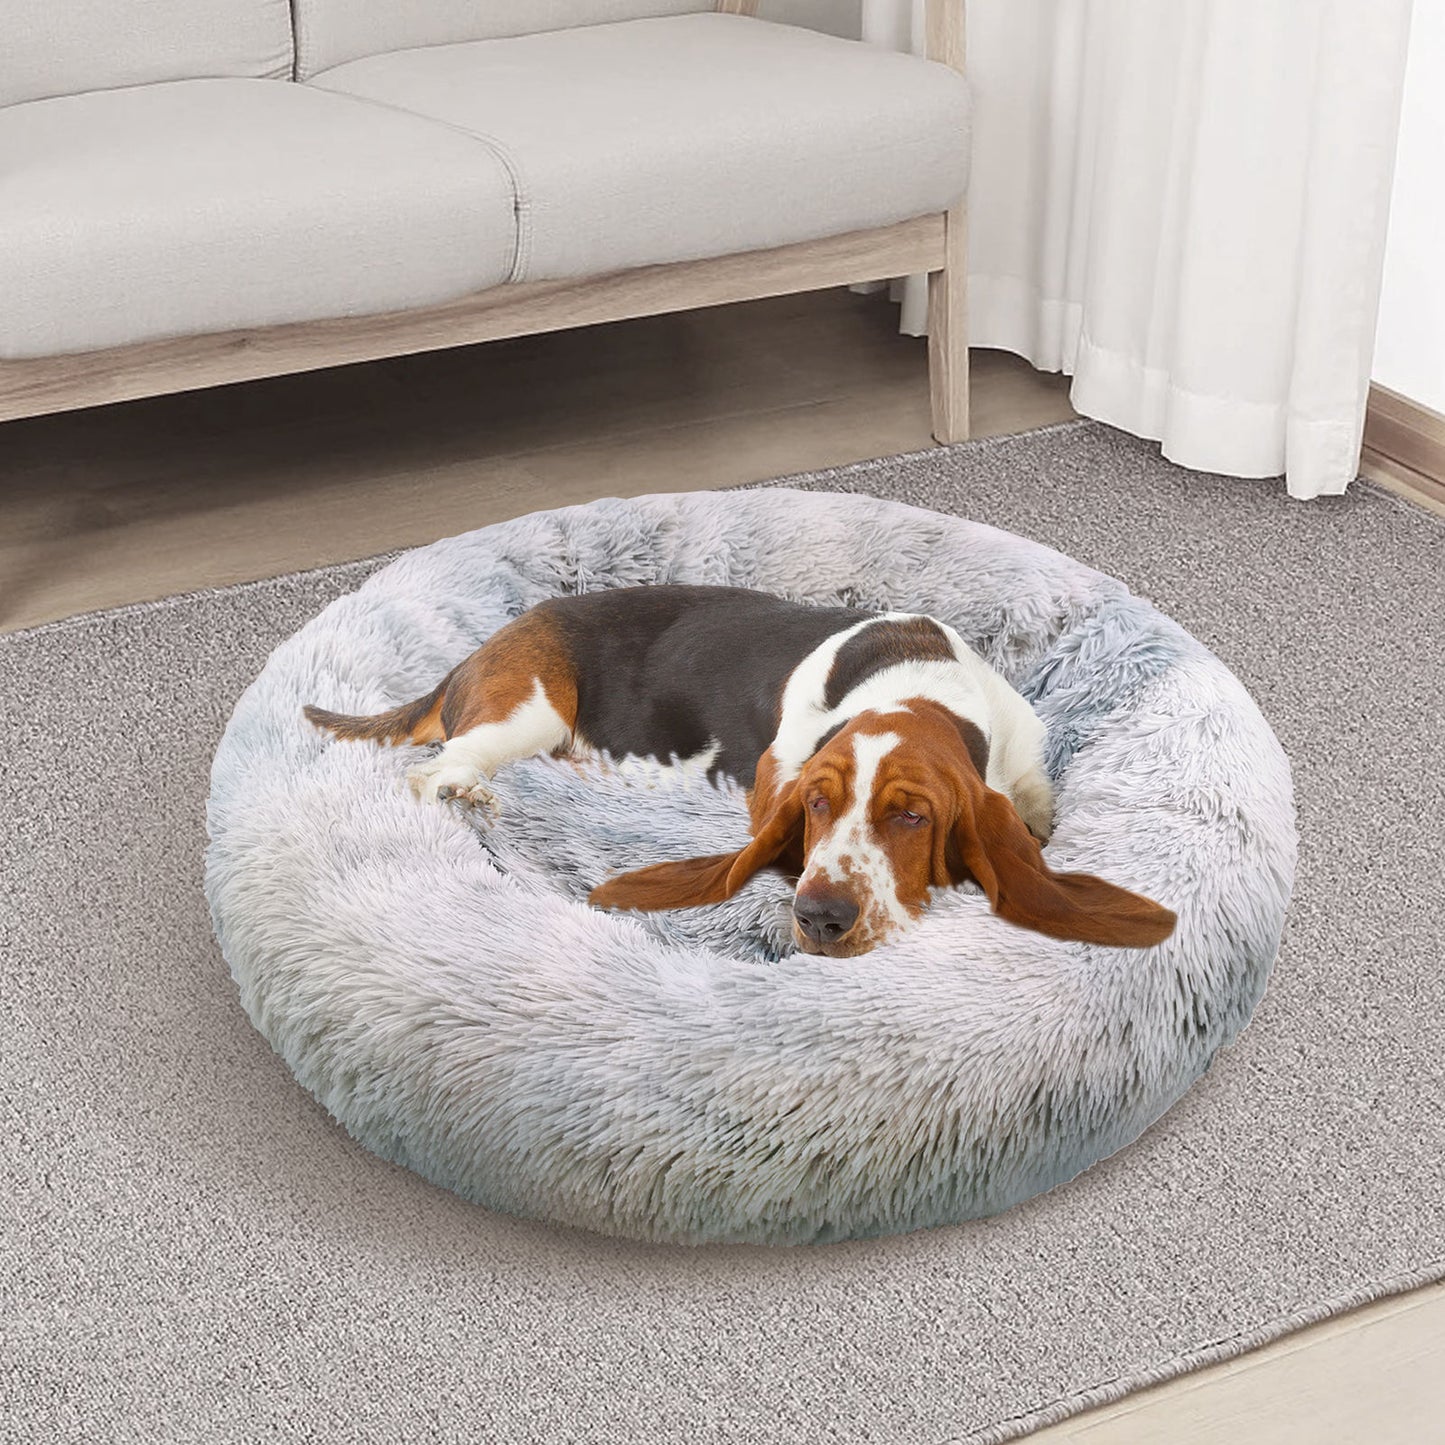 Pawfriends Dog Cat Pet Calming Bed Warm Soft Plush Round Nest Comfy Sleeping Washable Zip